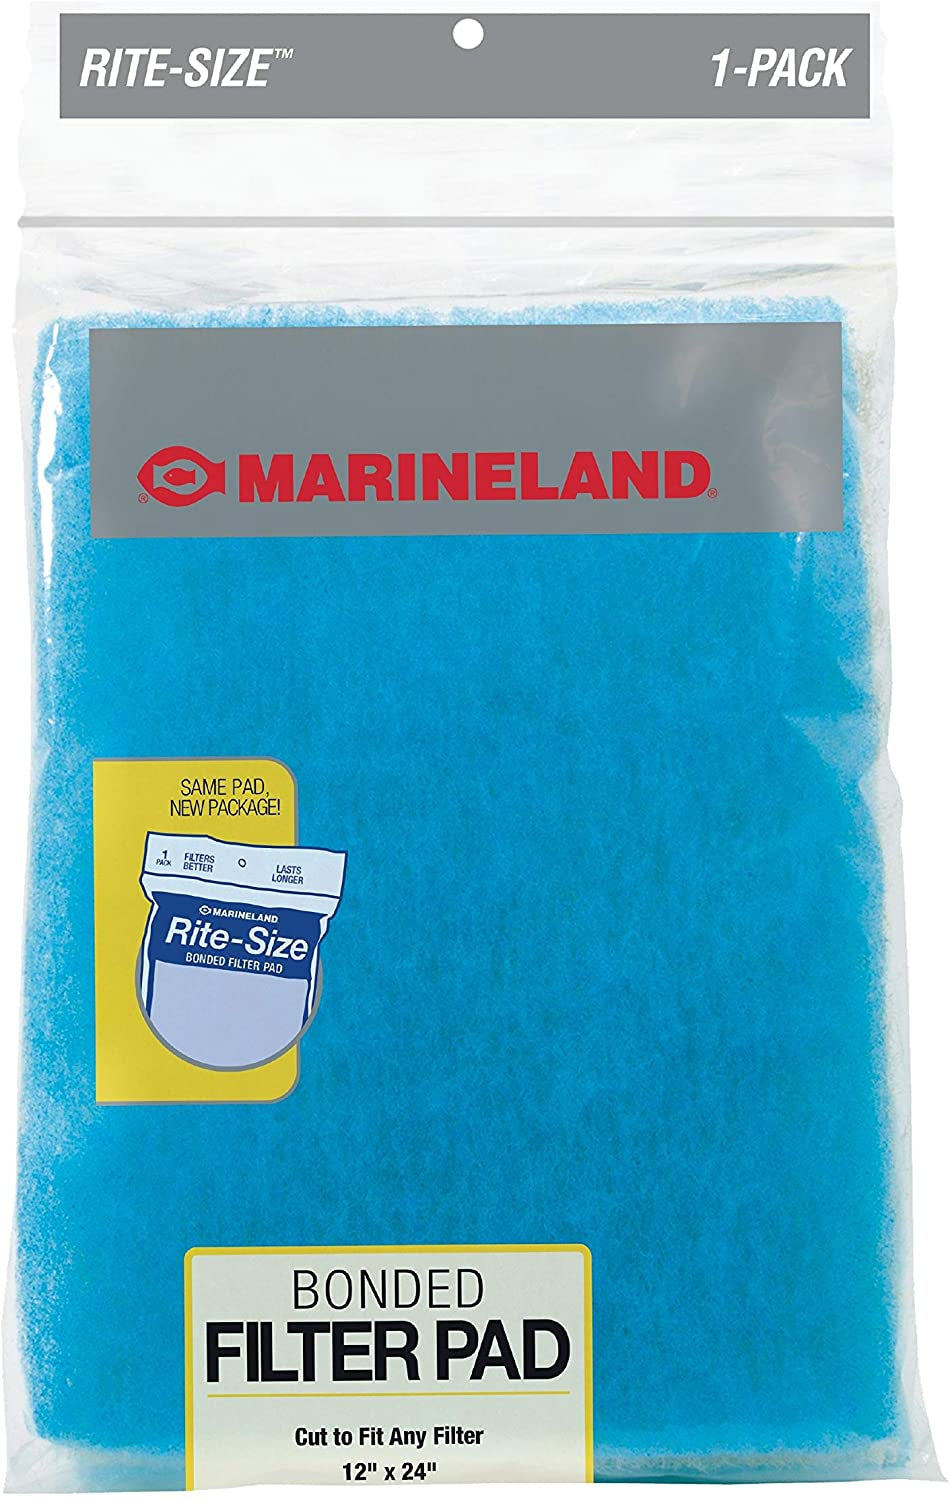 1 count Marineland Rite-Size Bonded Filter Pad